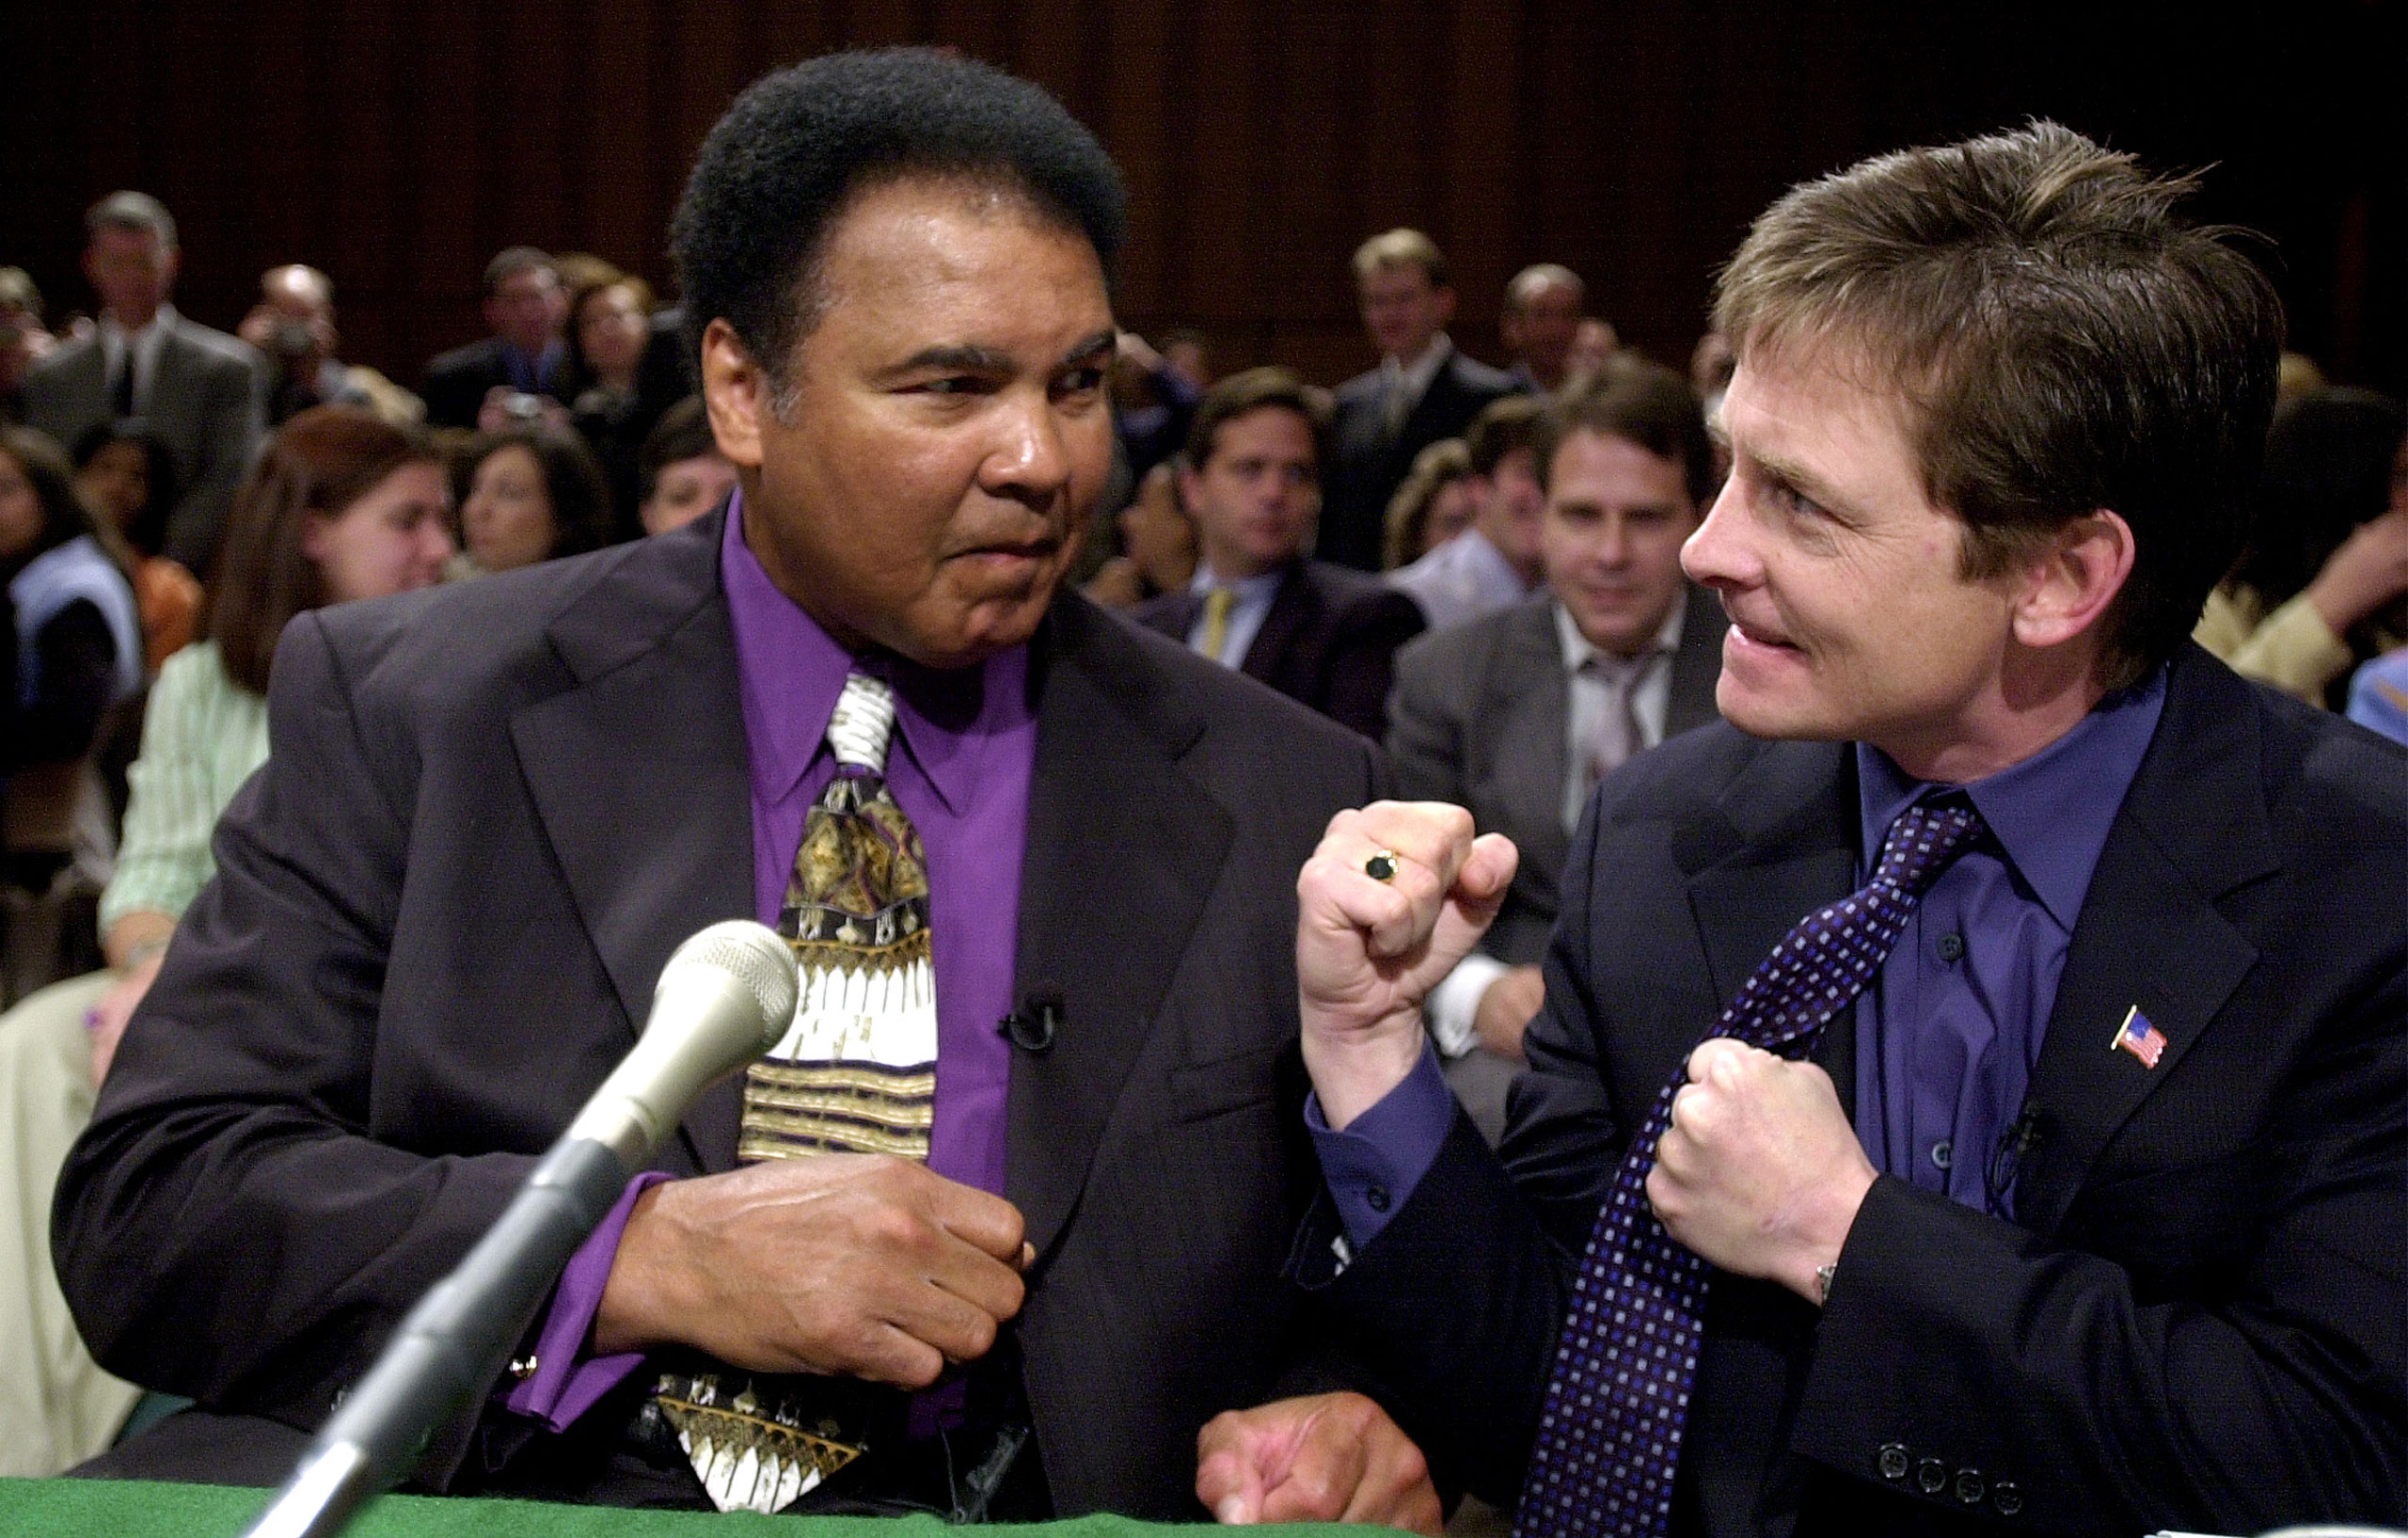 Muhammad Ali and actor Michael J. Fox before the start of a Senate subcommittee on Labor, Health, Human Services and Education hearing on Parkinson's Disease on Capitol Hill in Washington on May 22, 2002.